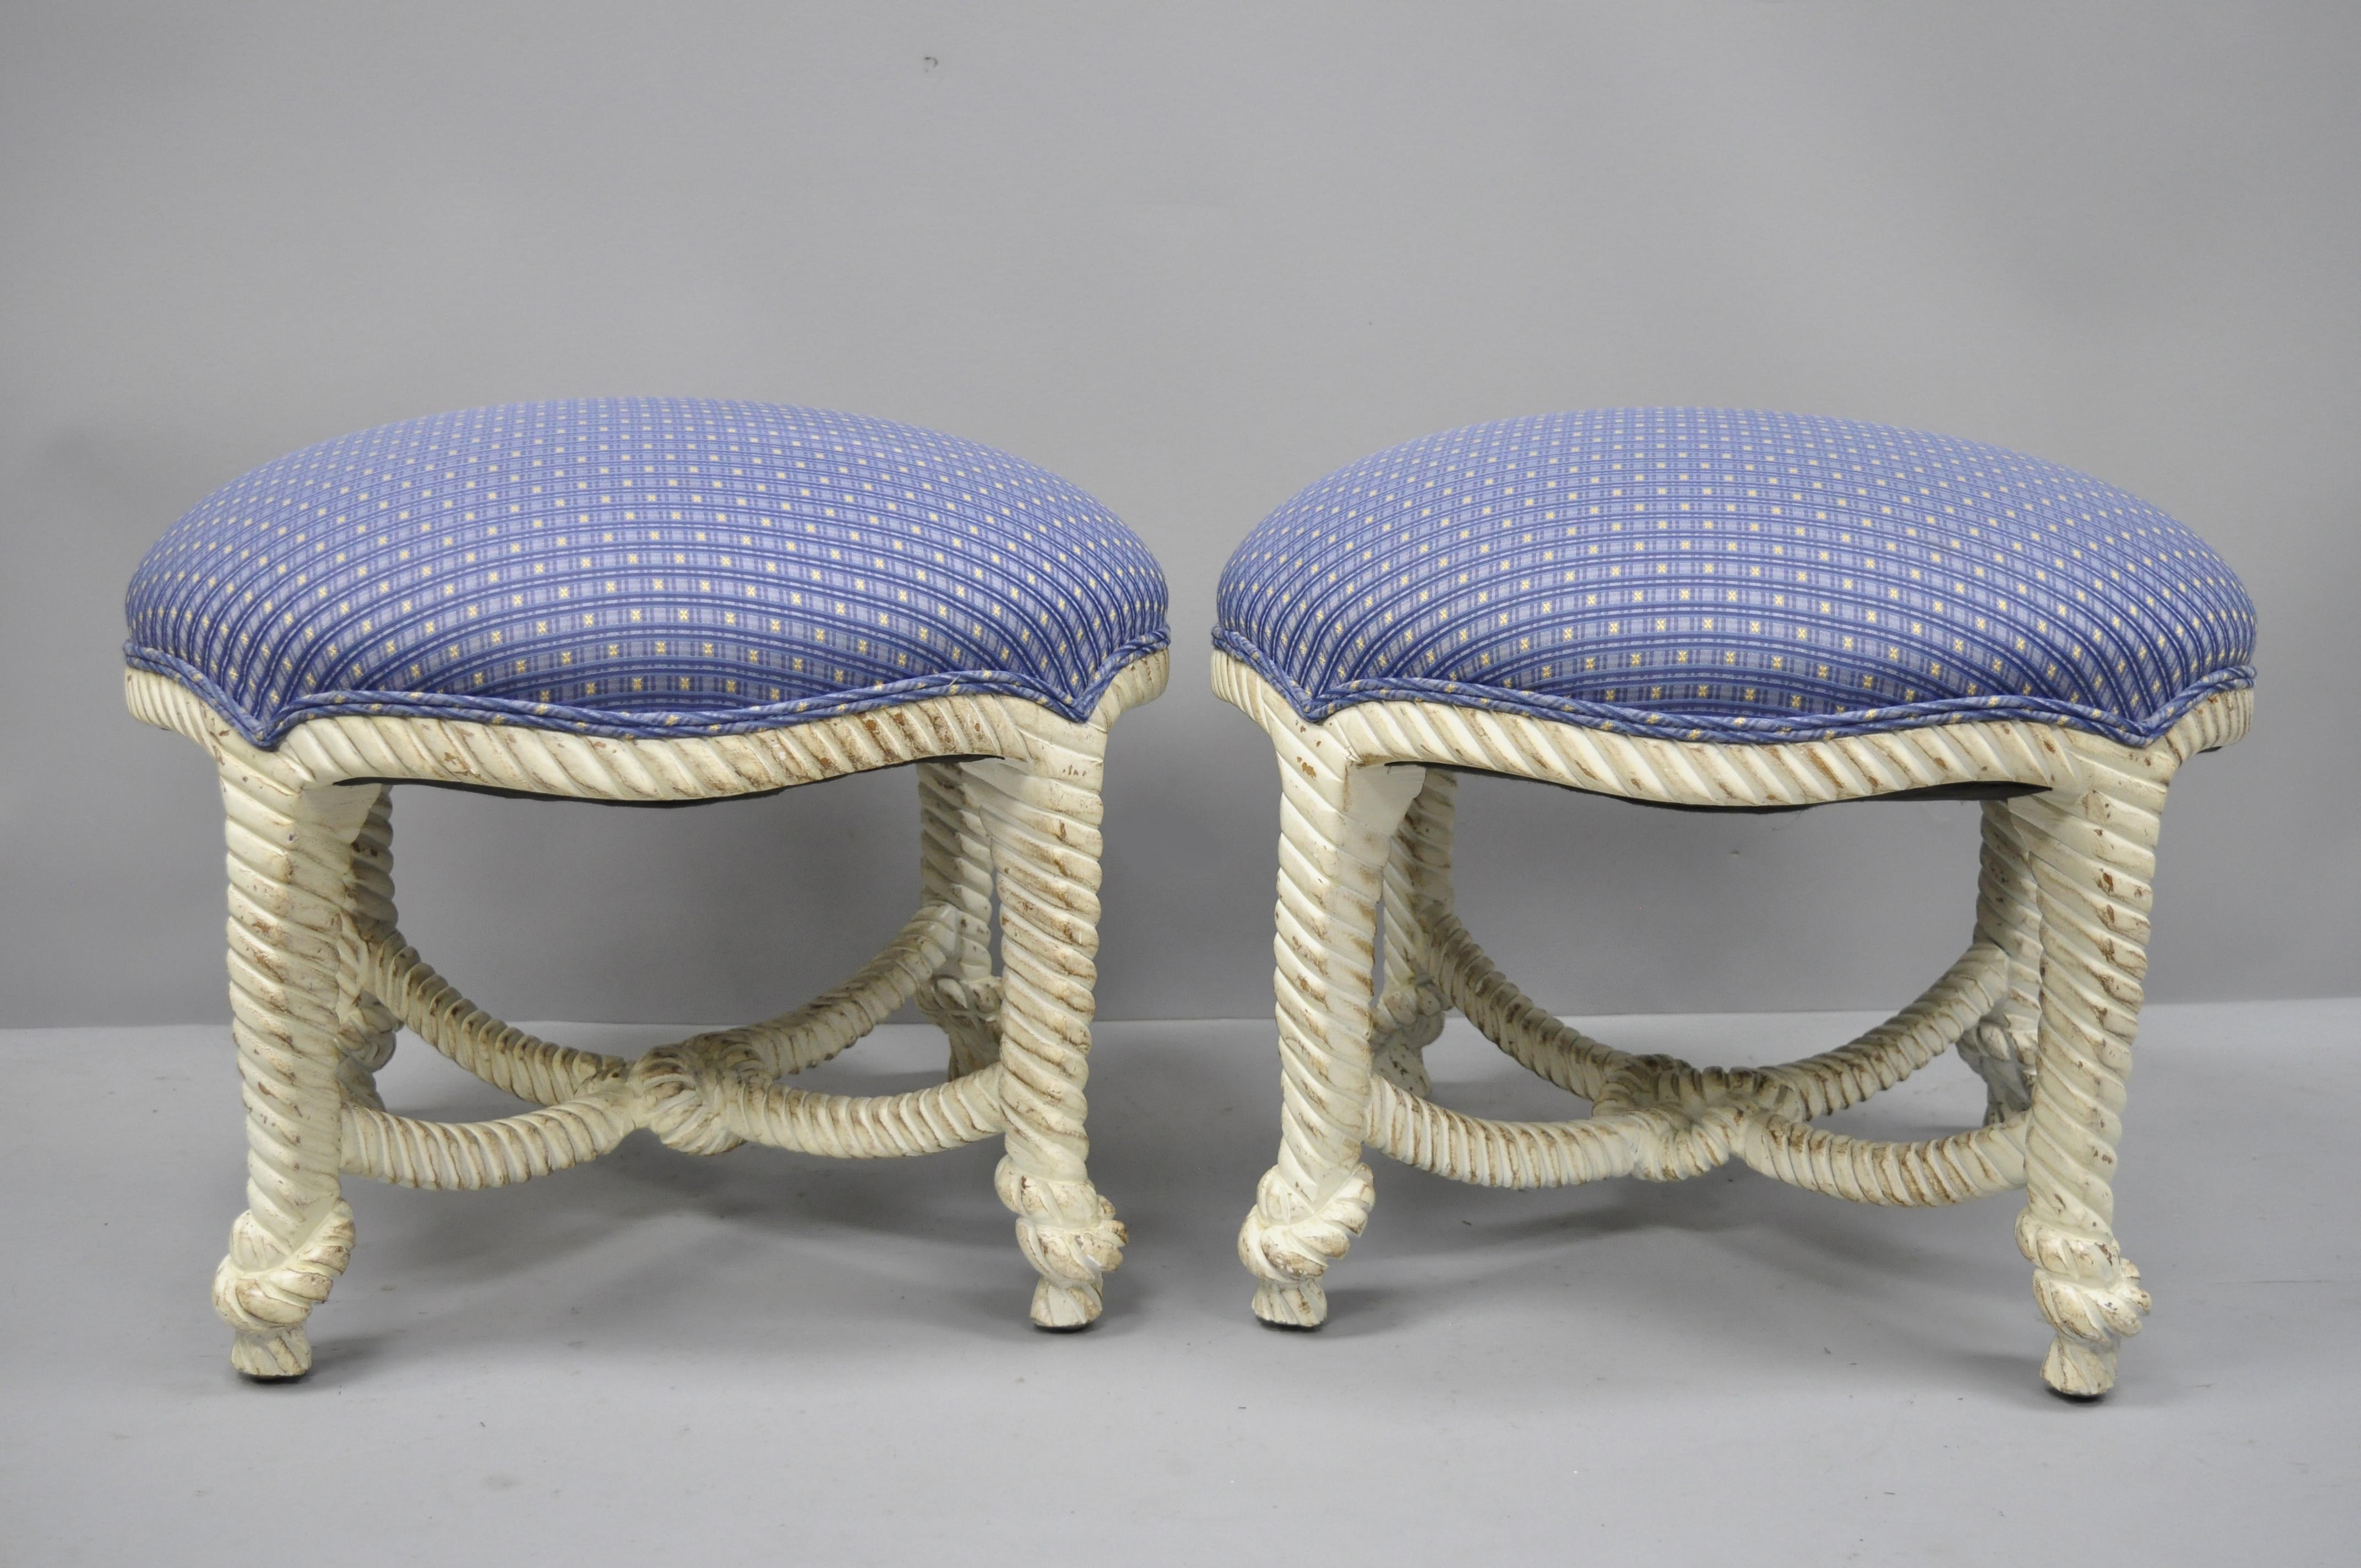 Italian Hollywood Regency white rope and knot carved wood pairs stools Napoleon III style. Item features round seats, carved knot stretcher, rope and knot carved legs, solid wood construction, distressed finish, nicely carved details, great style